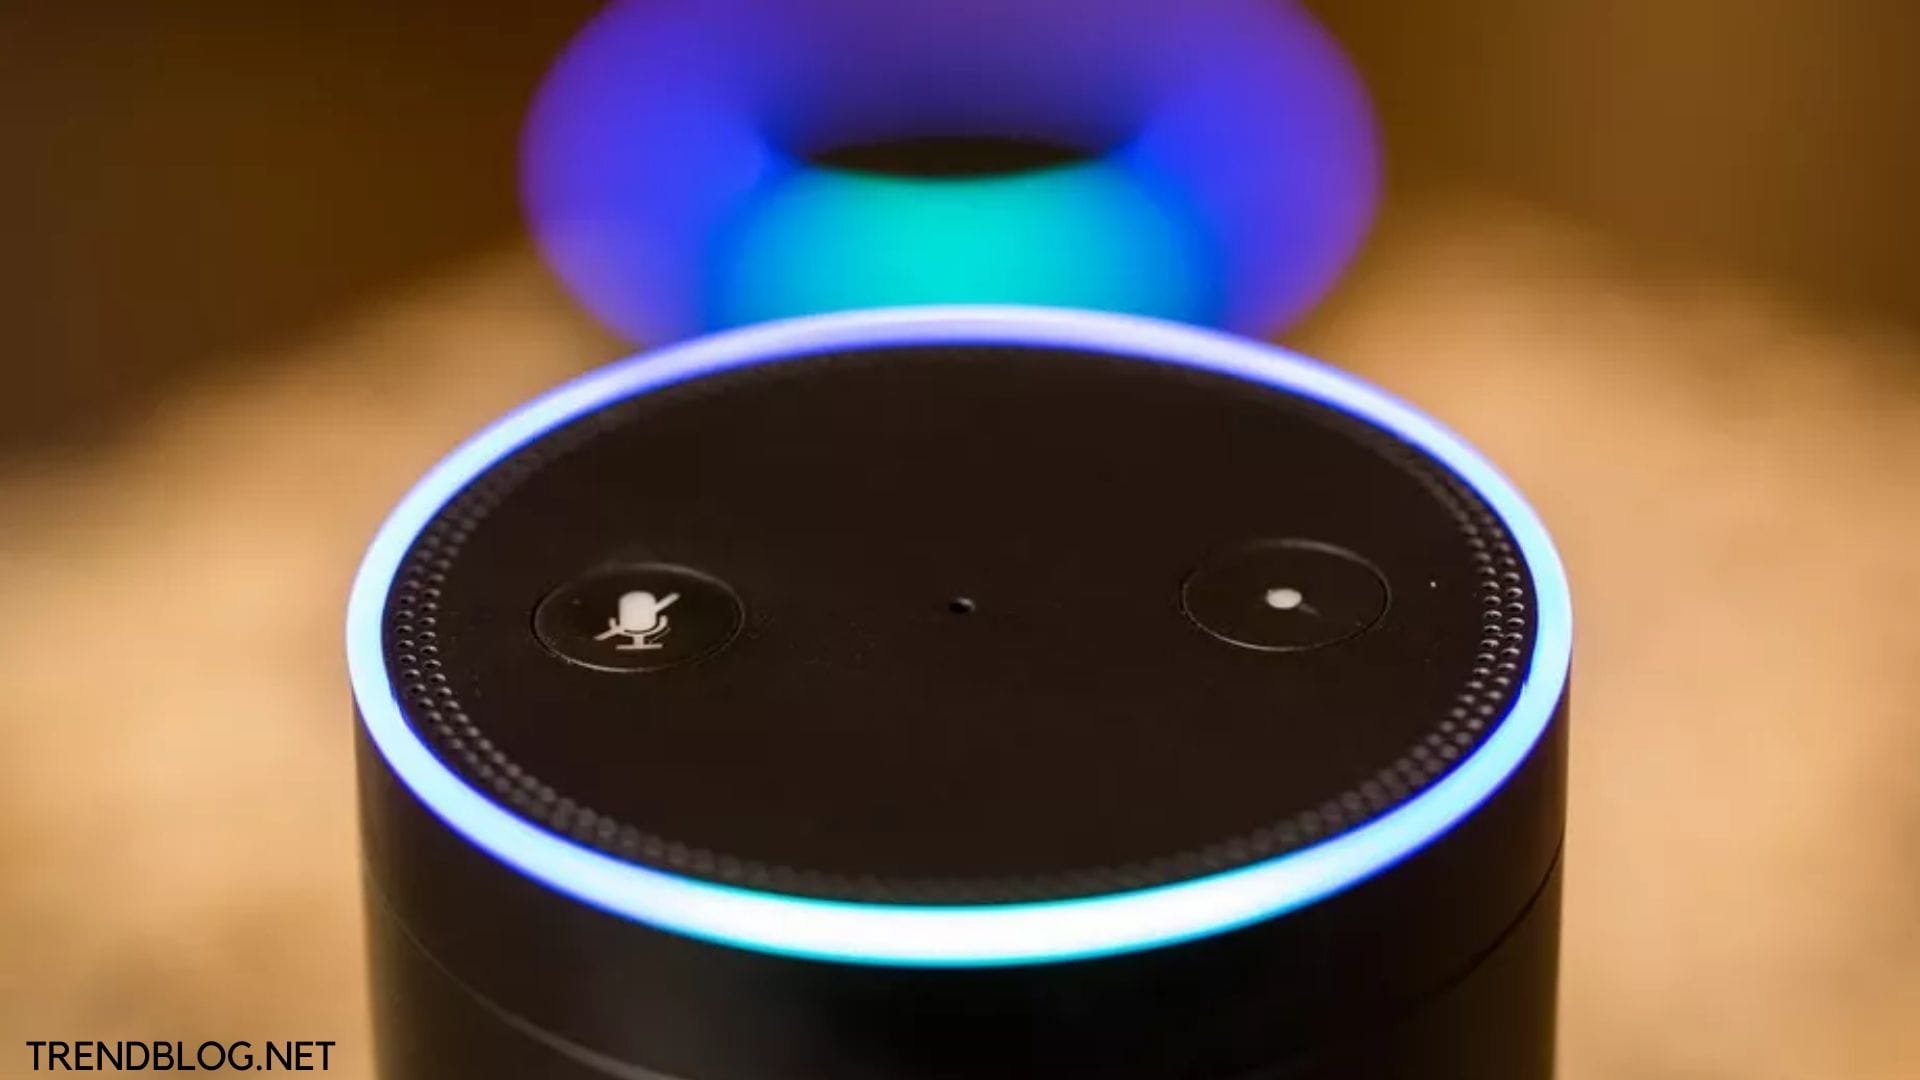  How to Connect Alexa to Bluetooth: Latest Updated: Within 10 Minutes